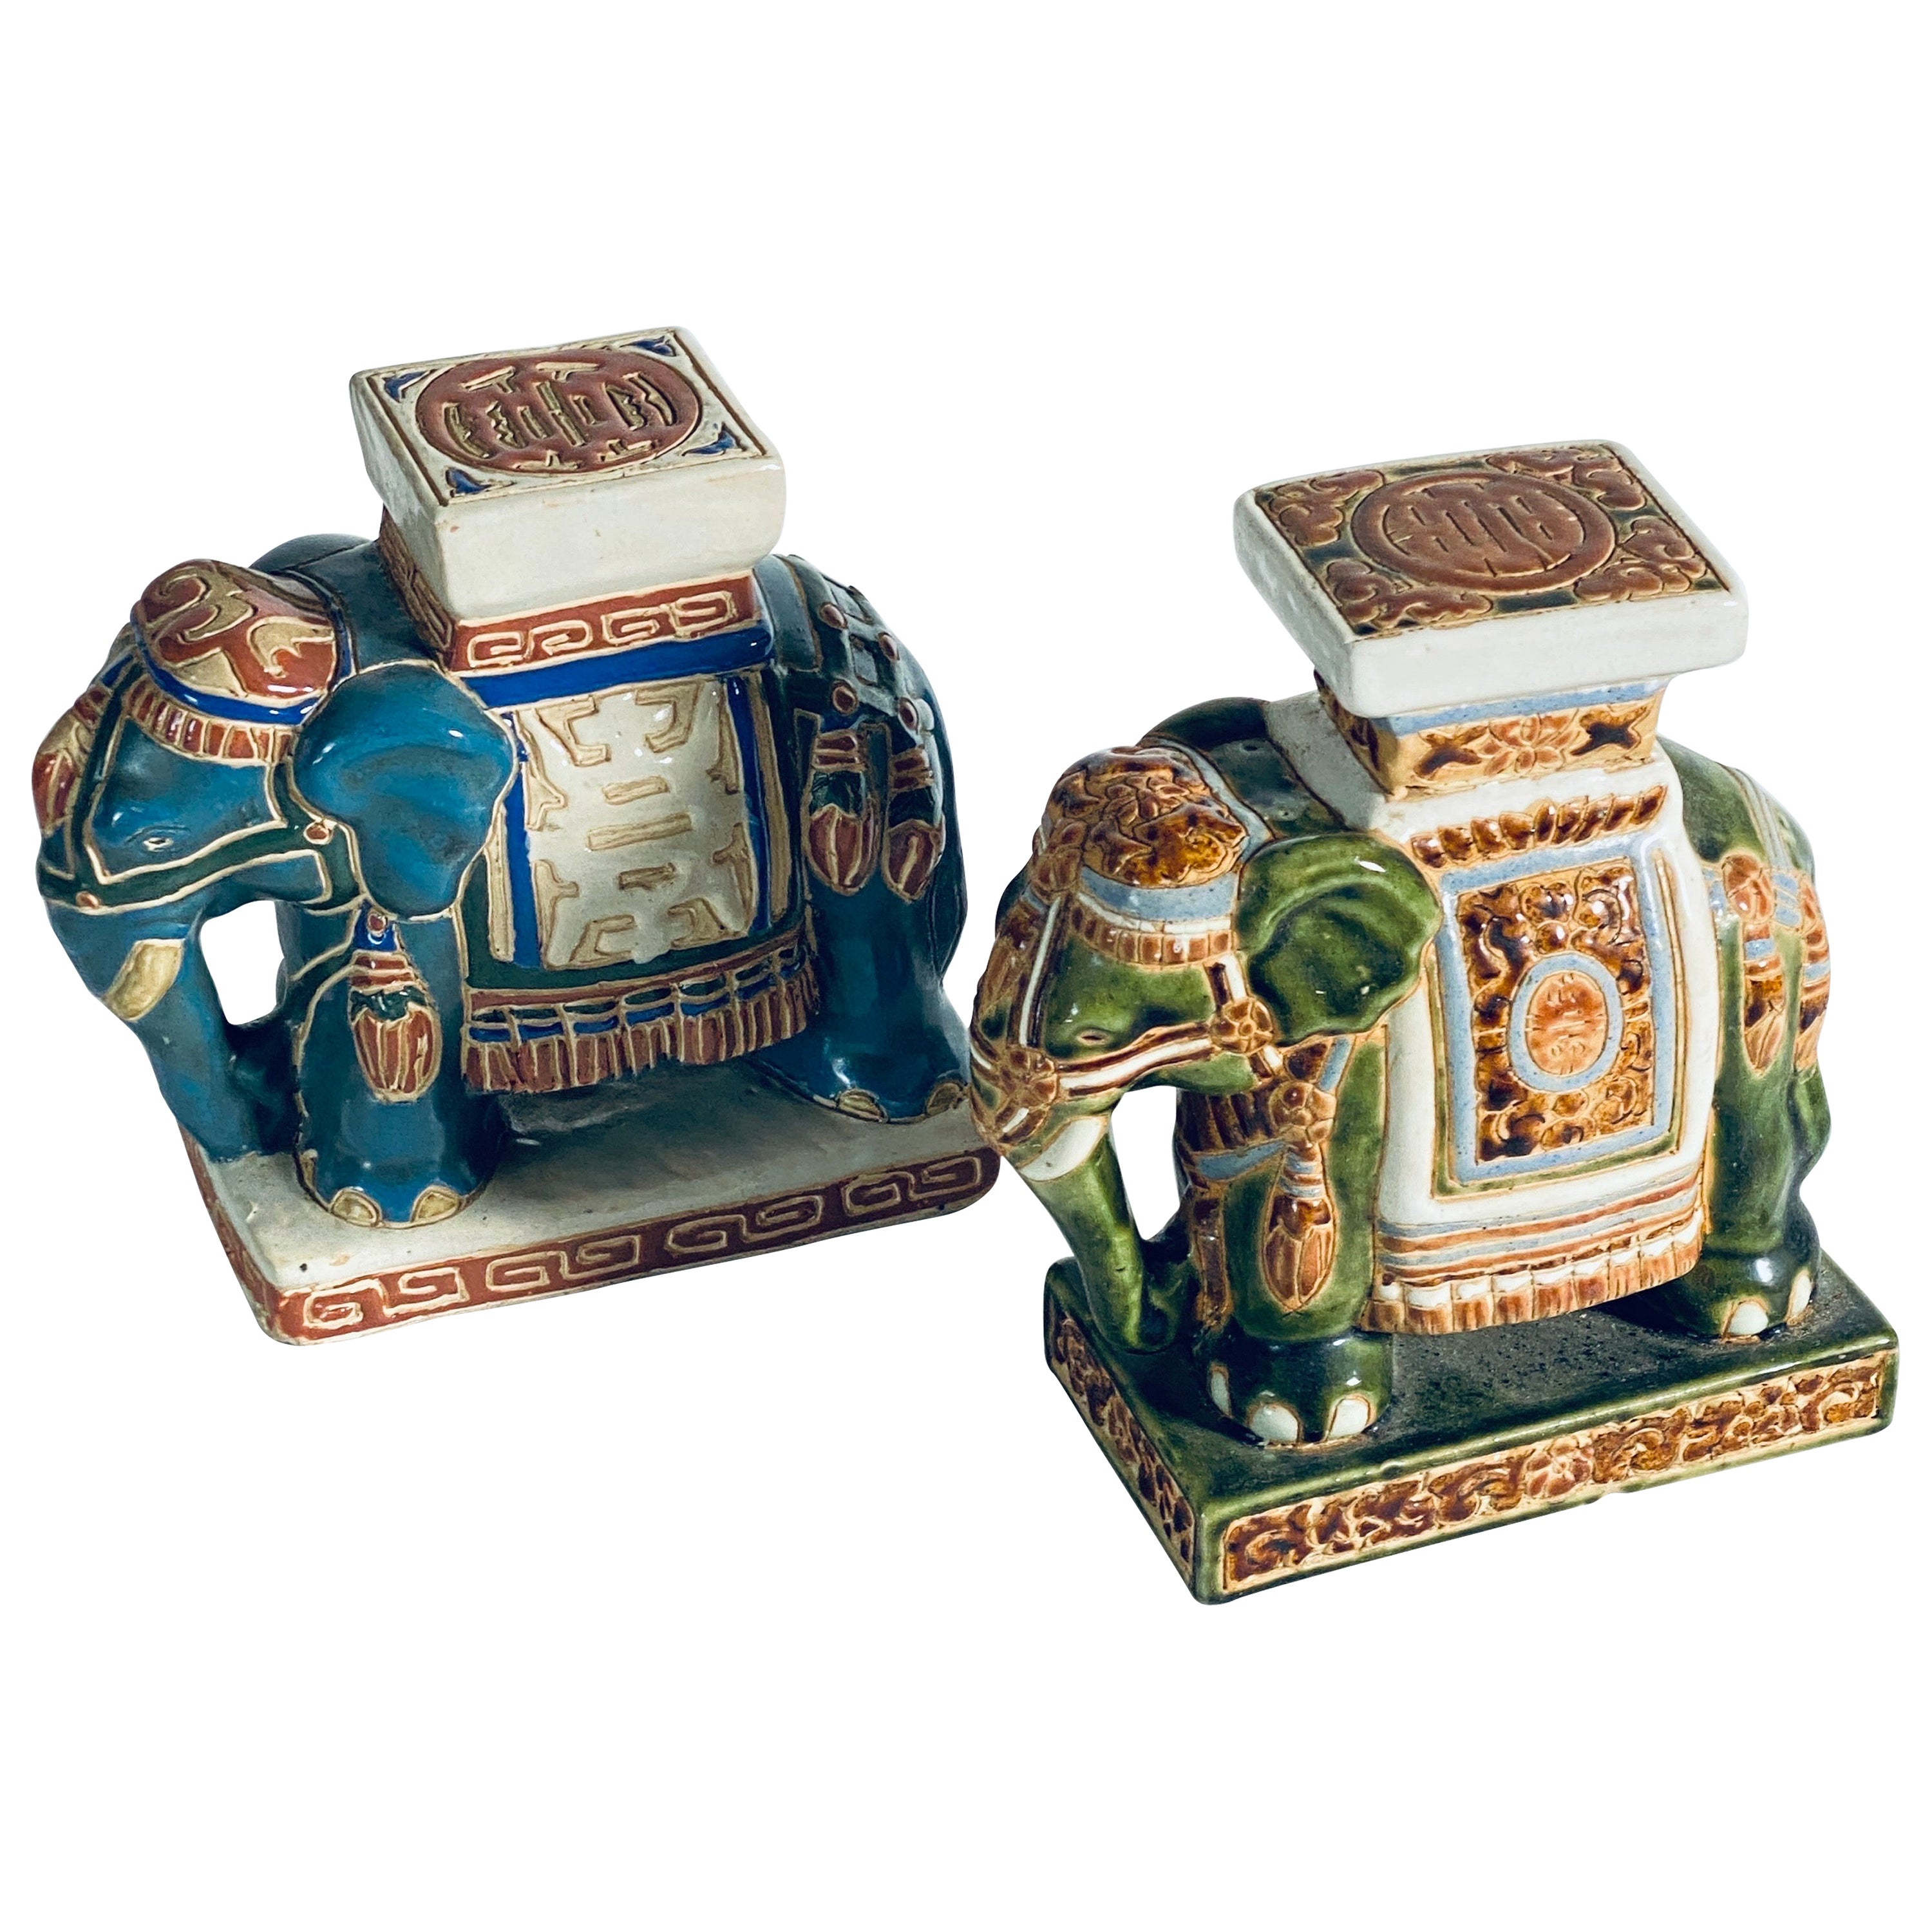 Pair of Ceramic Elephant Plant Holder, Blue and Green, China 20th Century